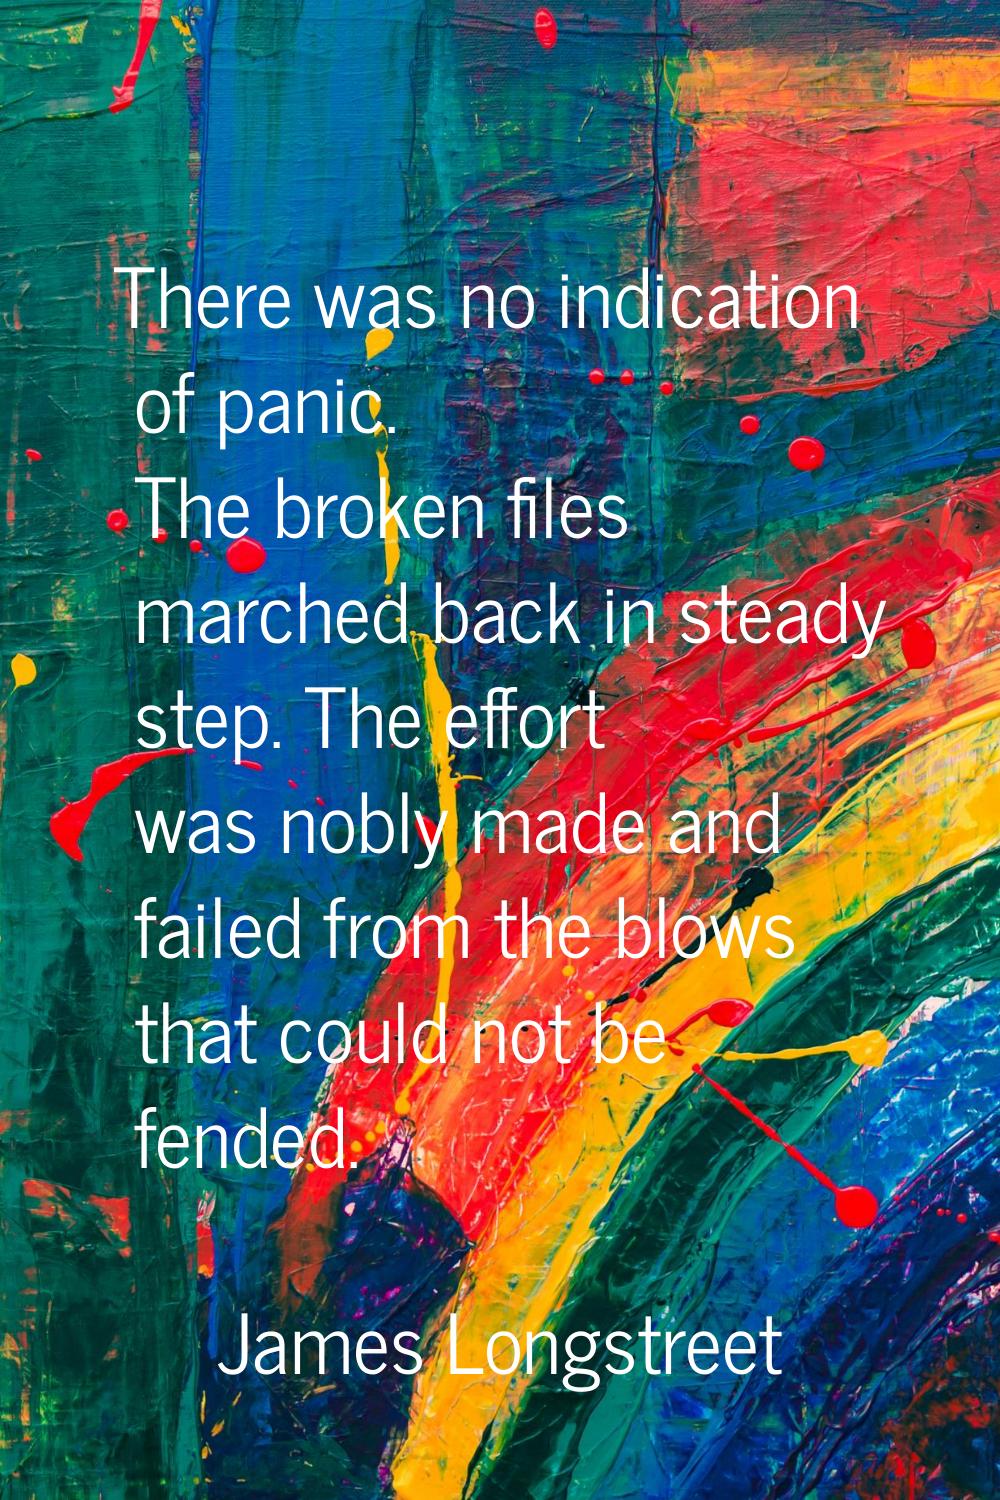 There was no indication of panic. The broken files marched back in steady step. The effort was nobl